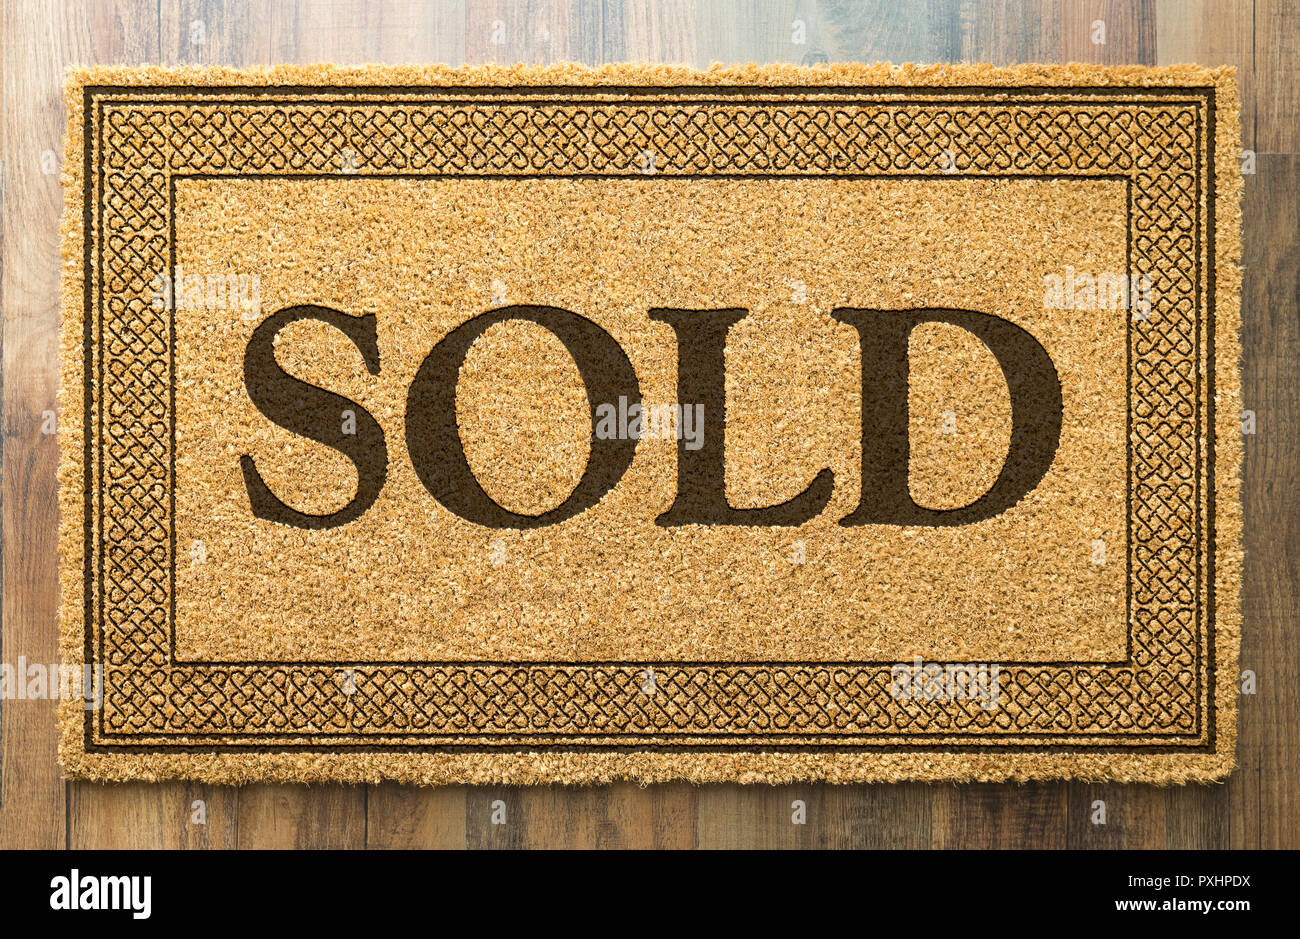 Sold Welcome Mat On A Wood Floor Background. Stock Photo